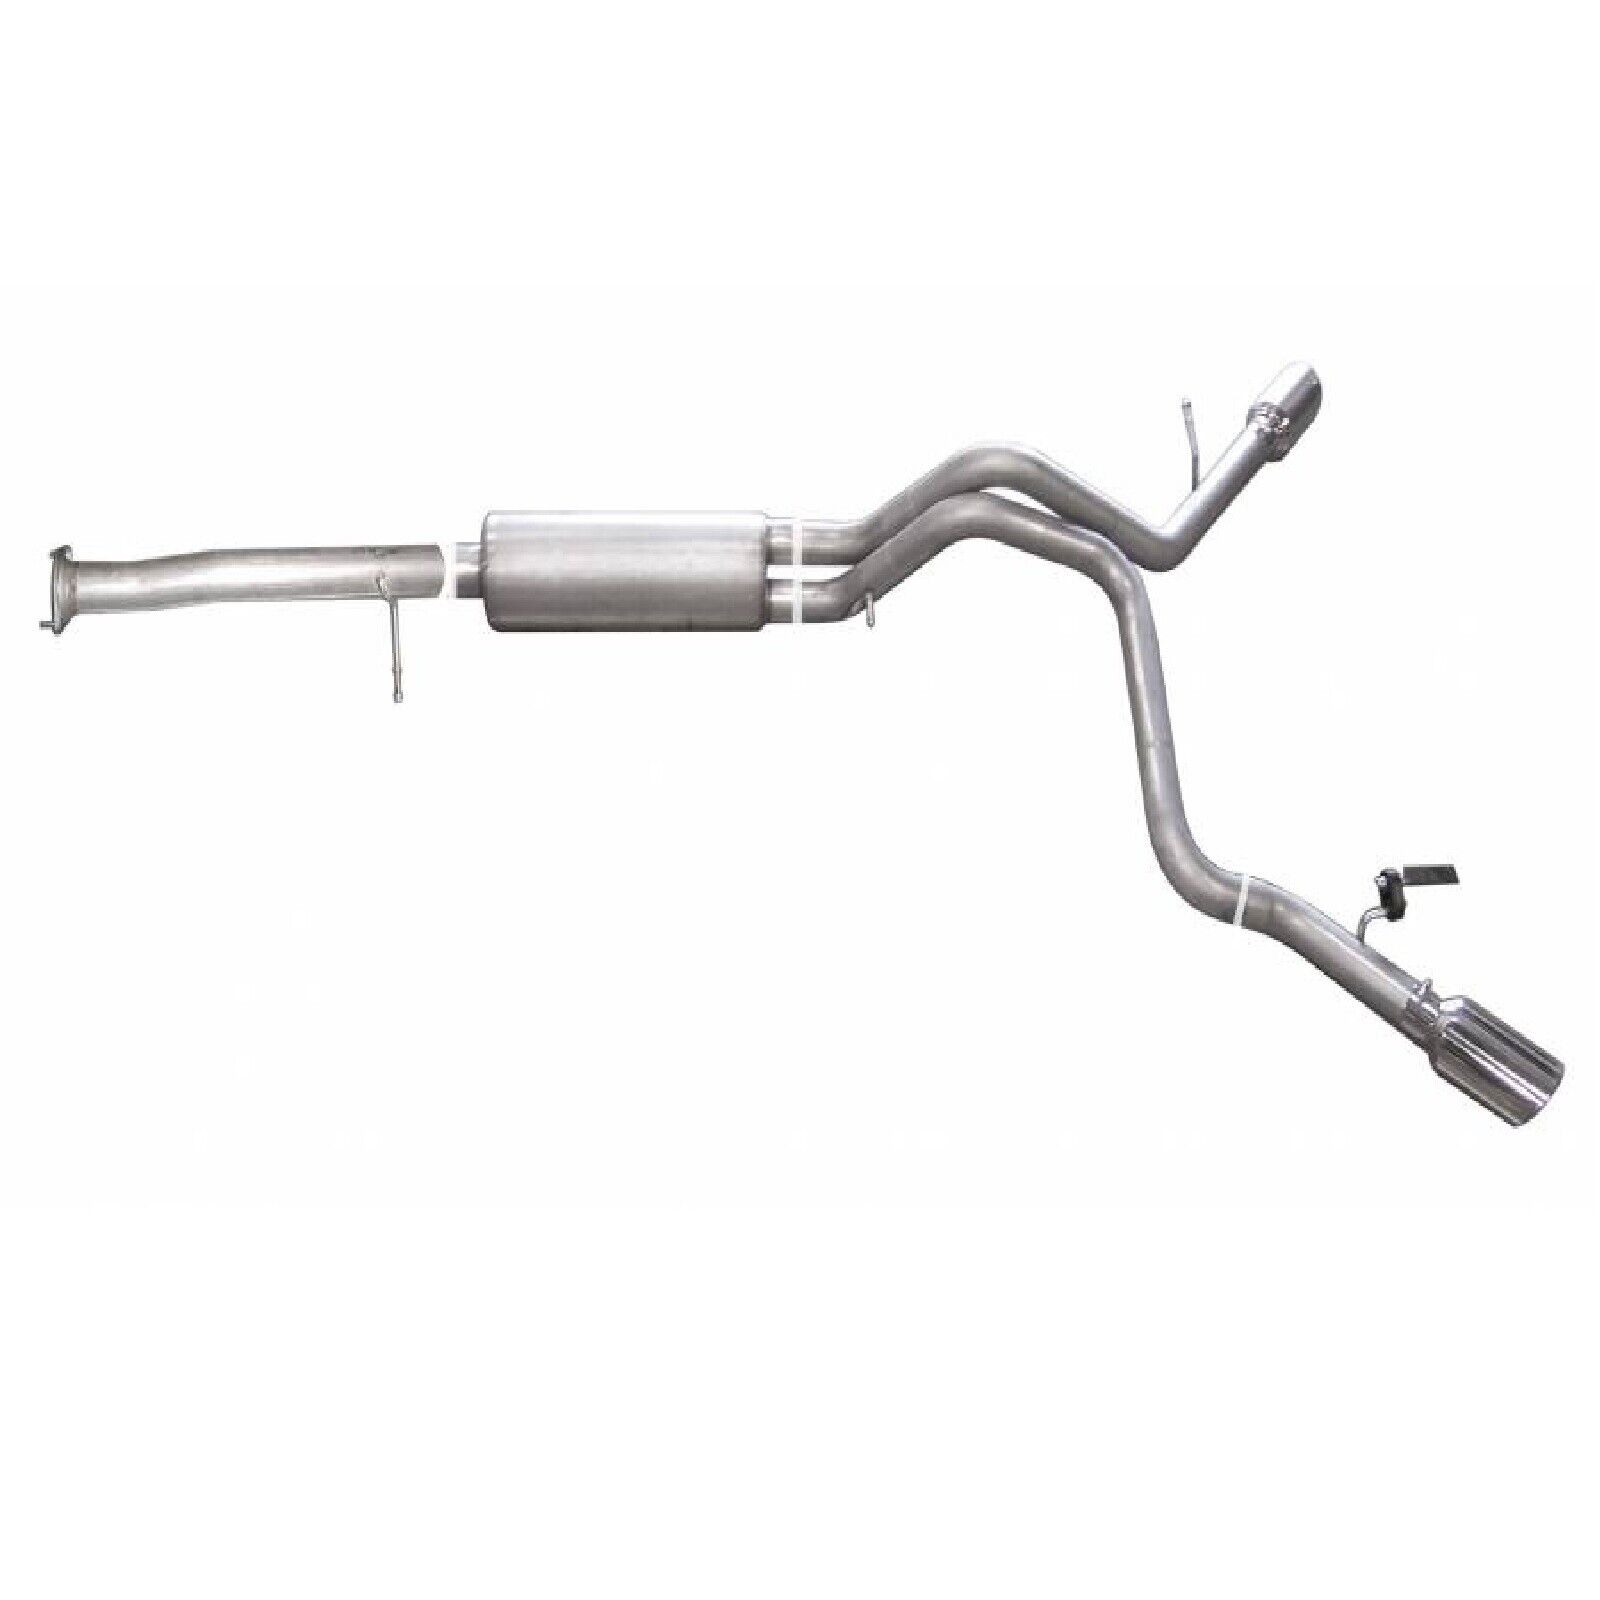 Gibson 5403 Aluminized Dual Extreme Exhaust System for 07-10 EXT/ESV/XL1500 6.2L